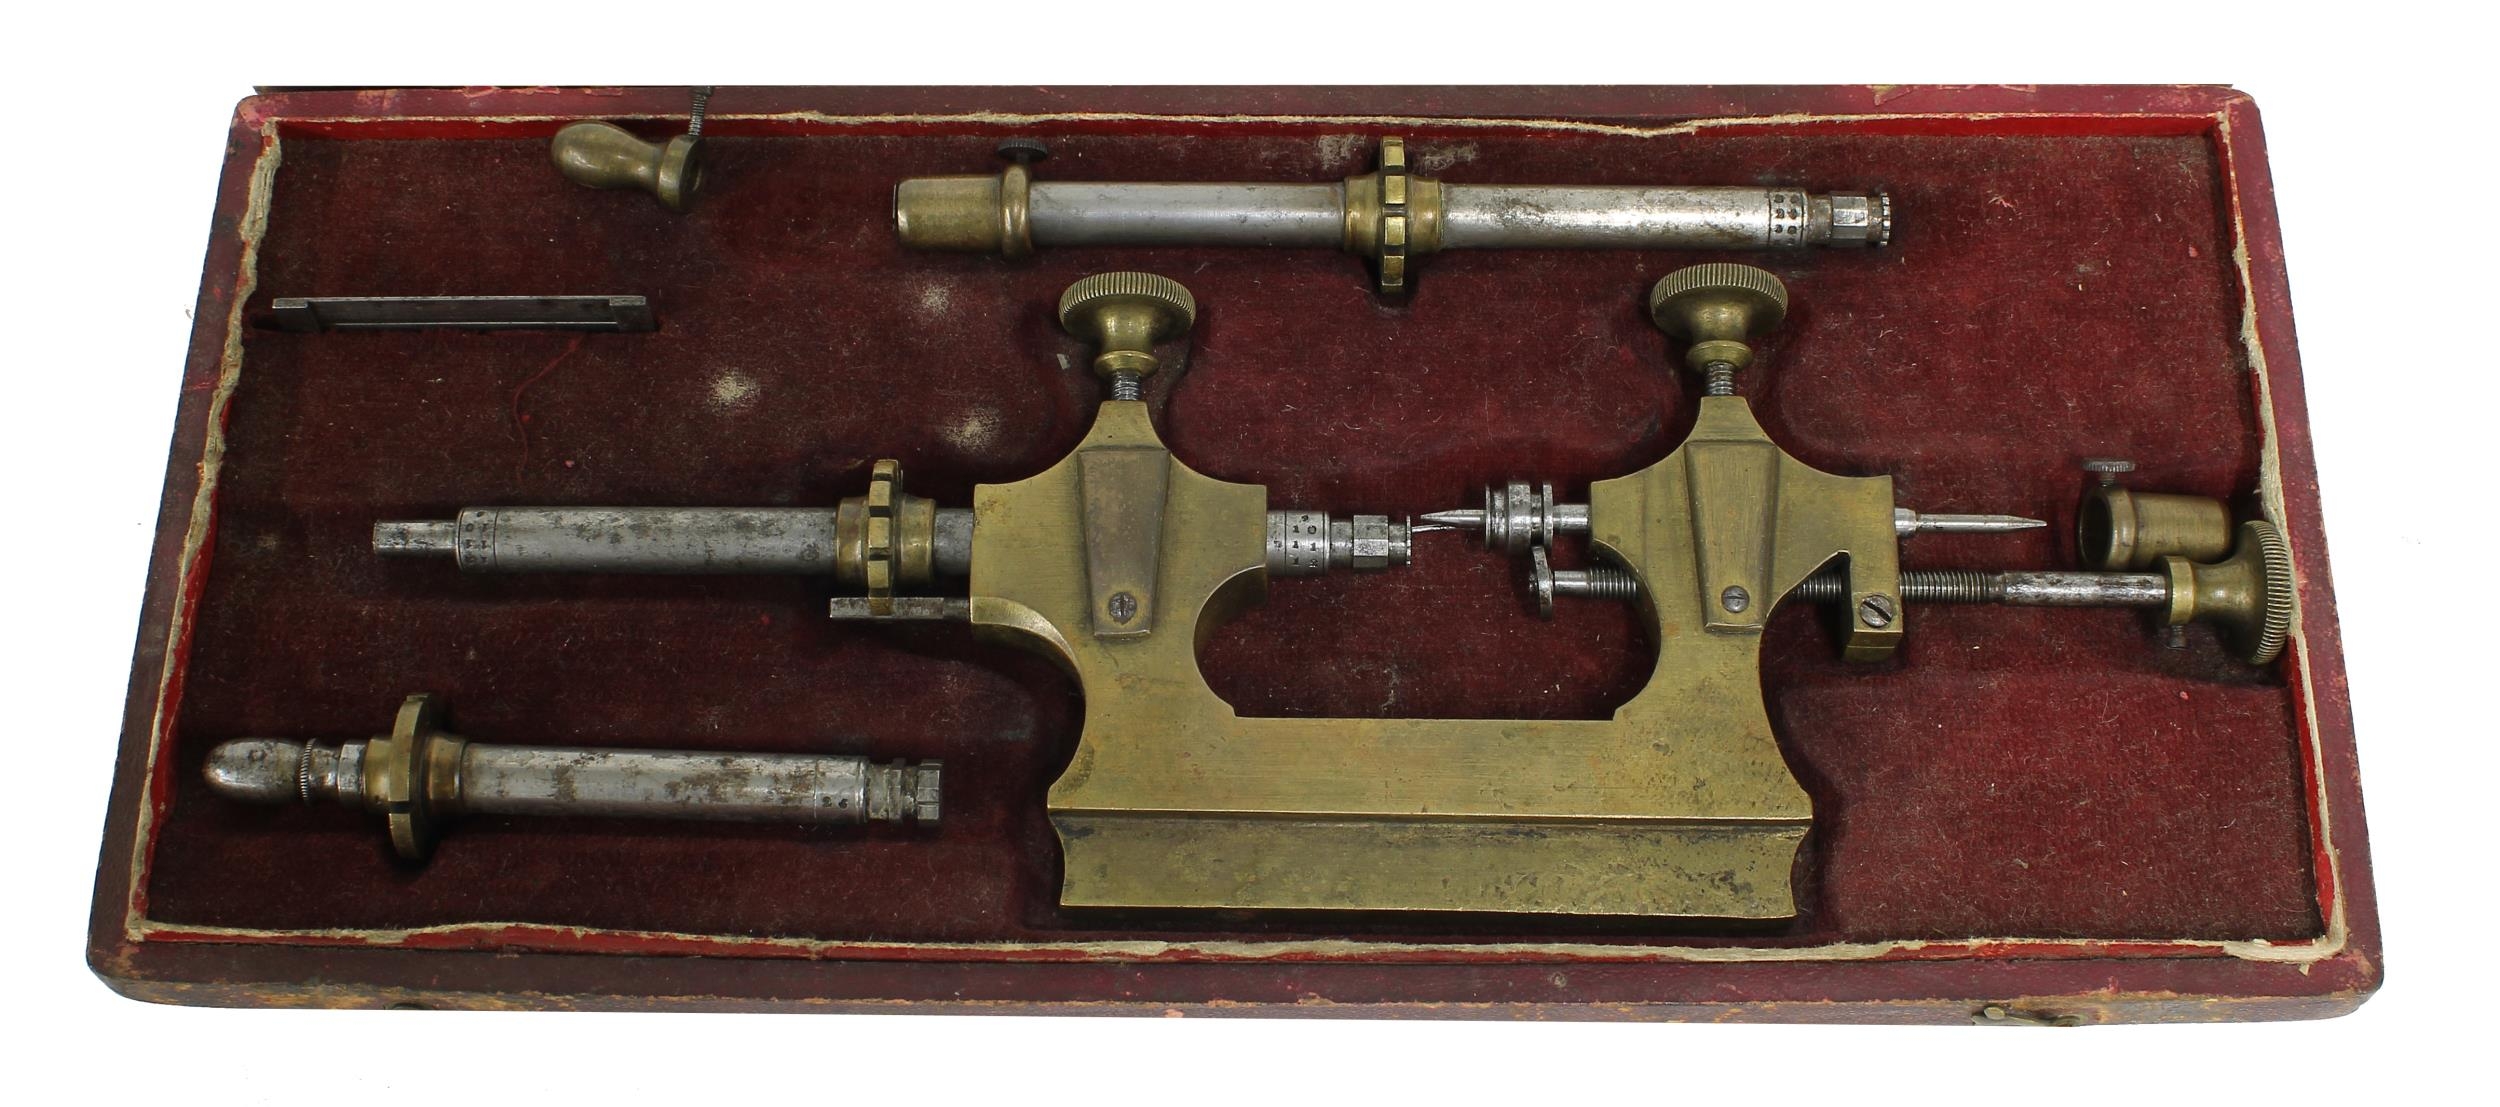 Cased 'Tour á Pivoter' tool, within a fitted case